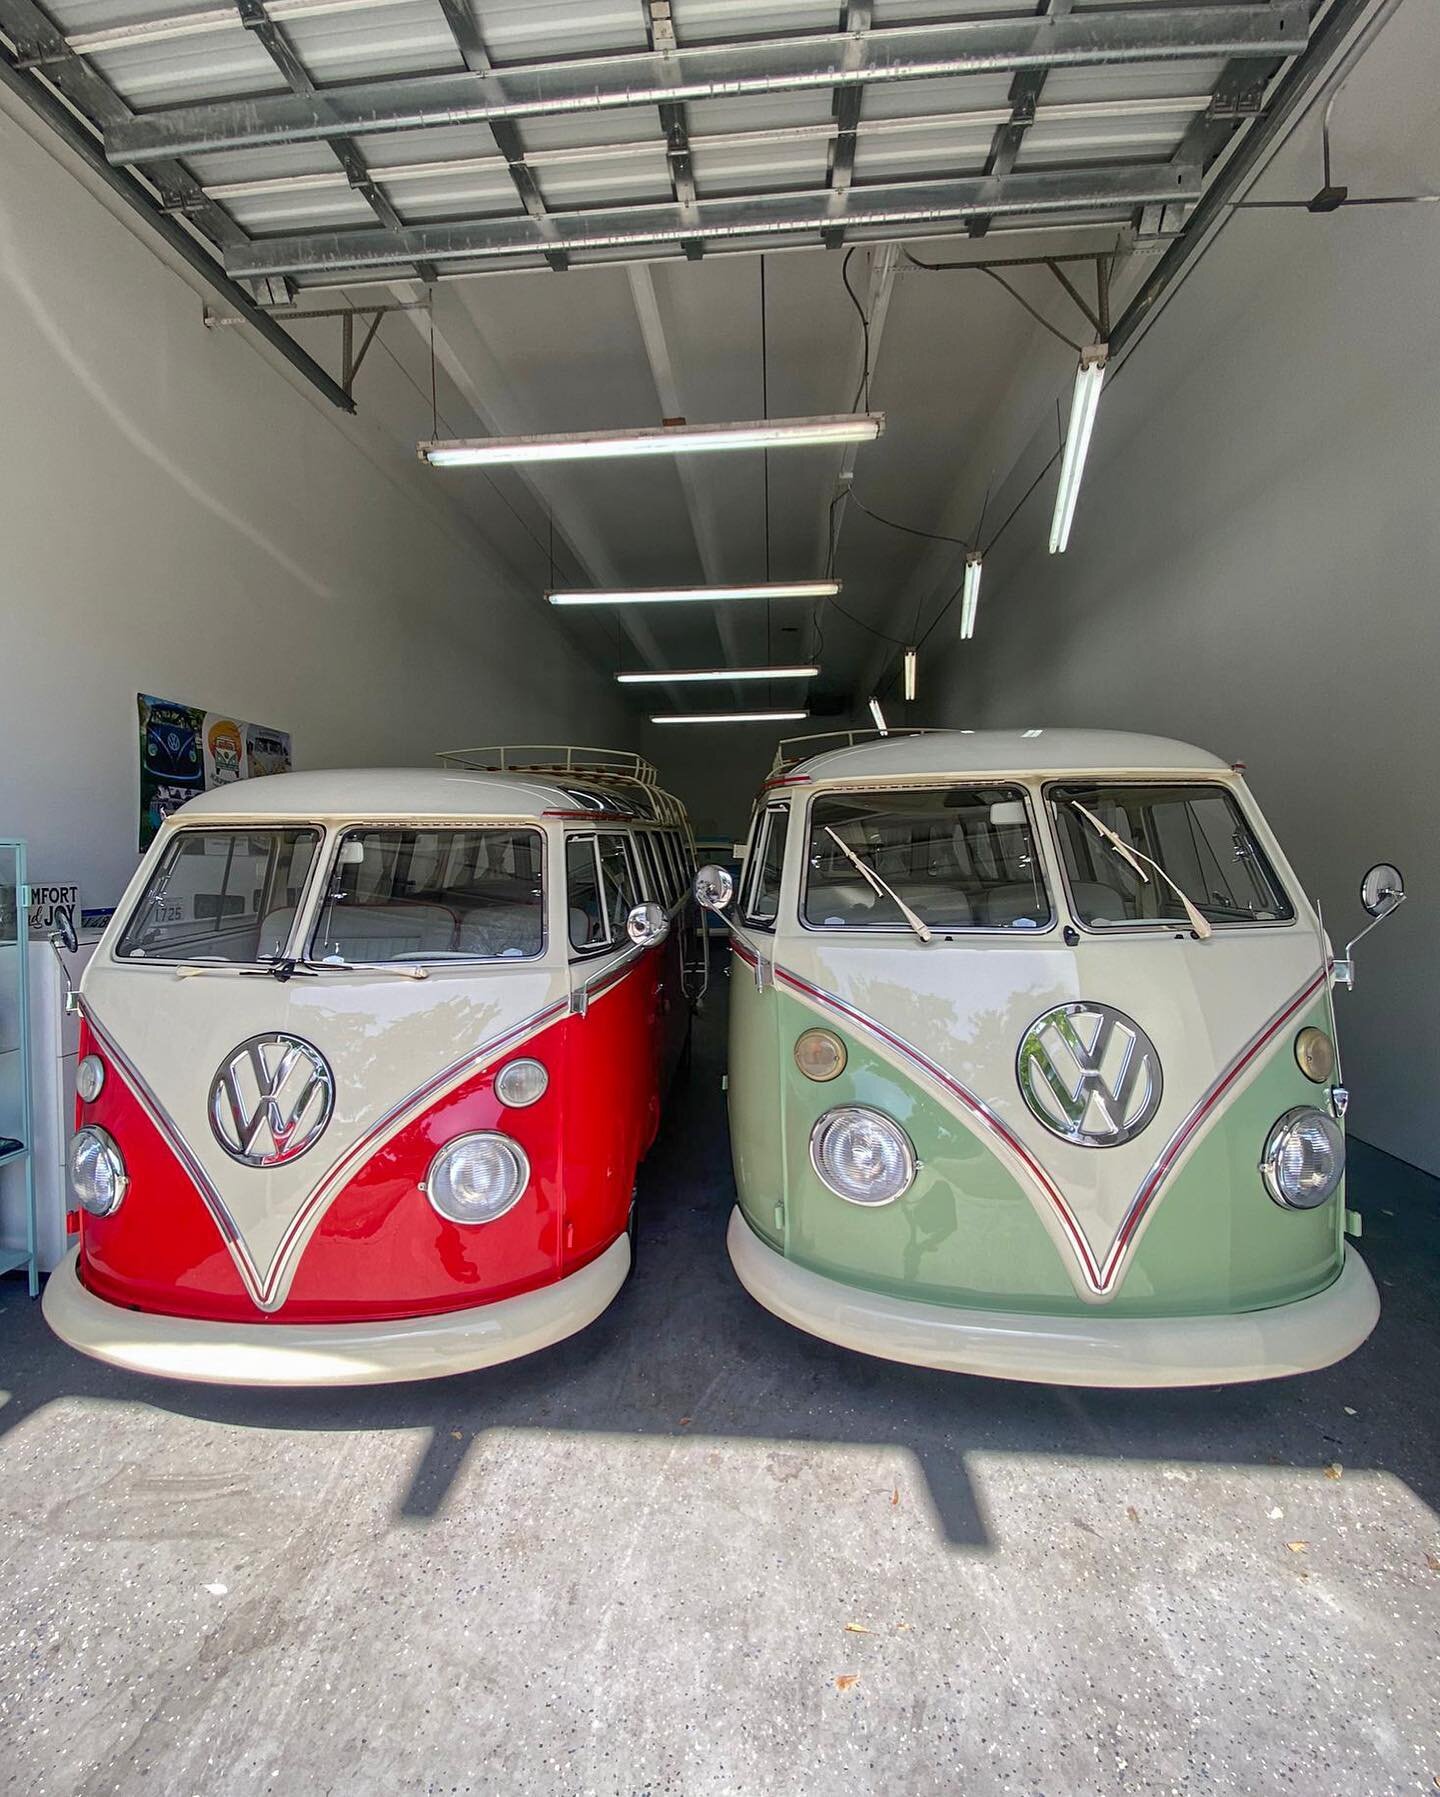 SOLD || Yesterday we said bye to these 2 beautiful VW, but a happy owner is definitely excited for the new adventures they will have! Which color would you pick? ❤️💚